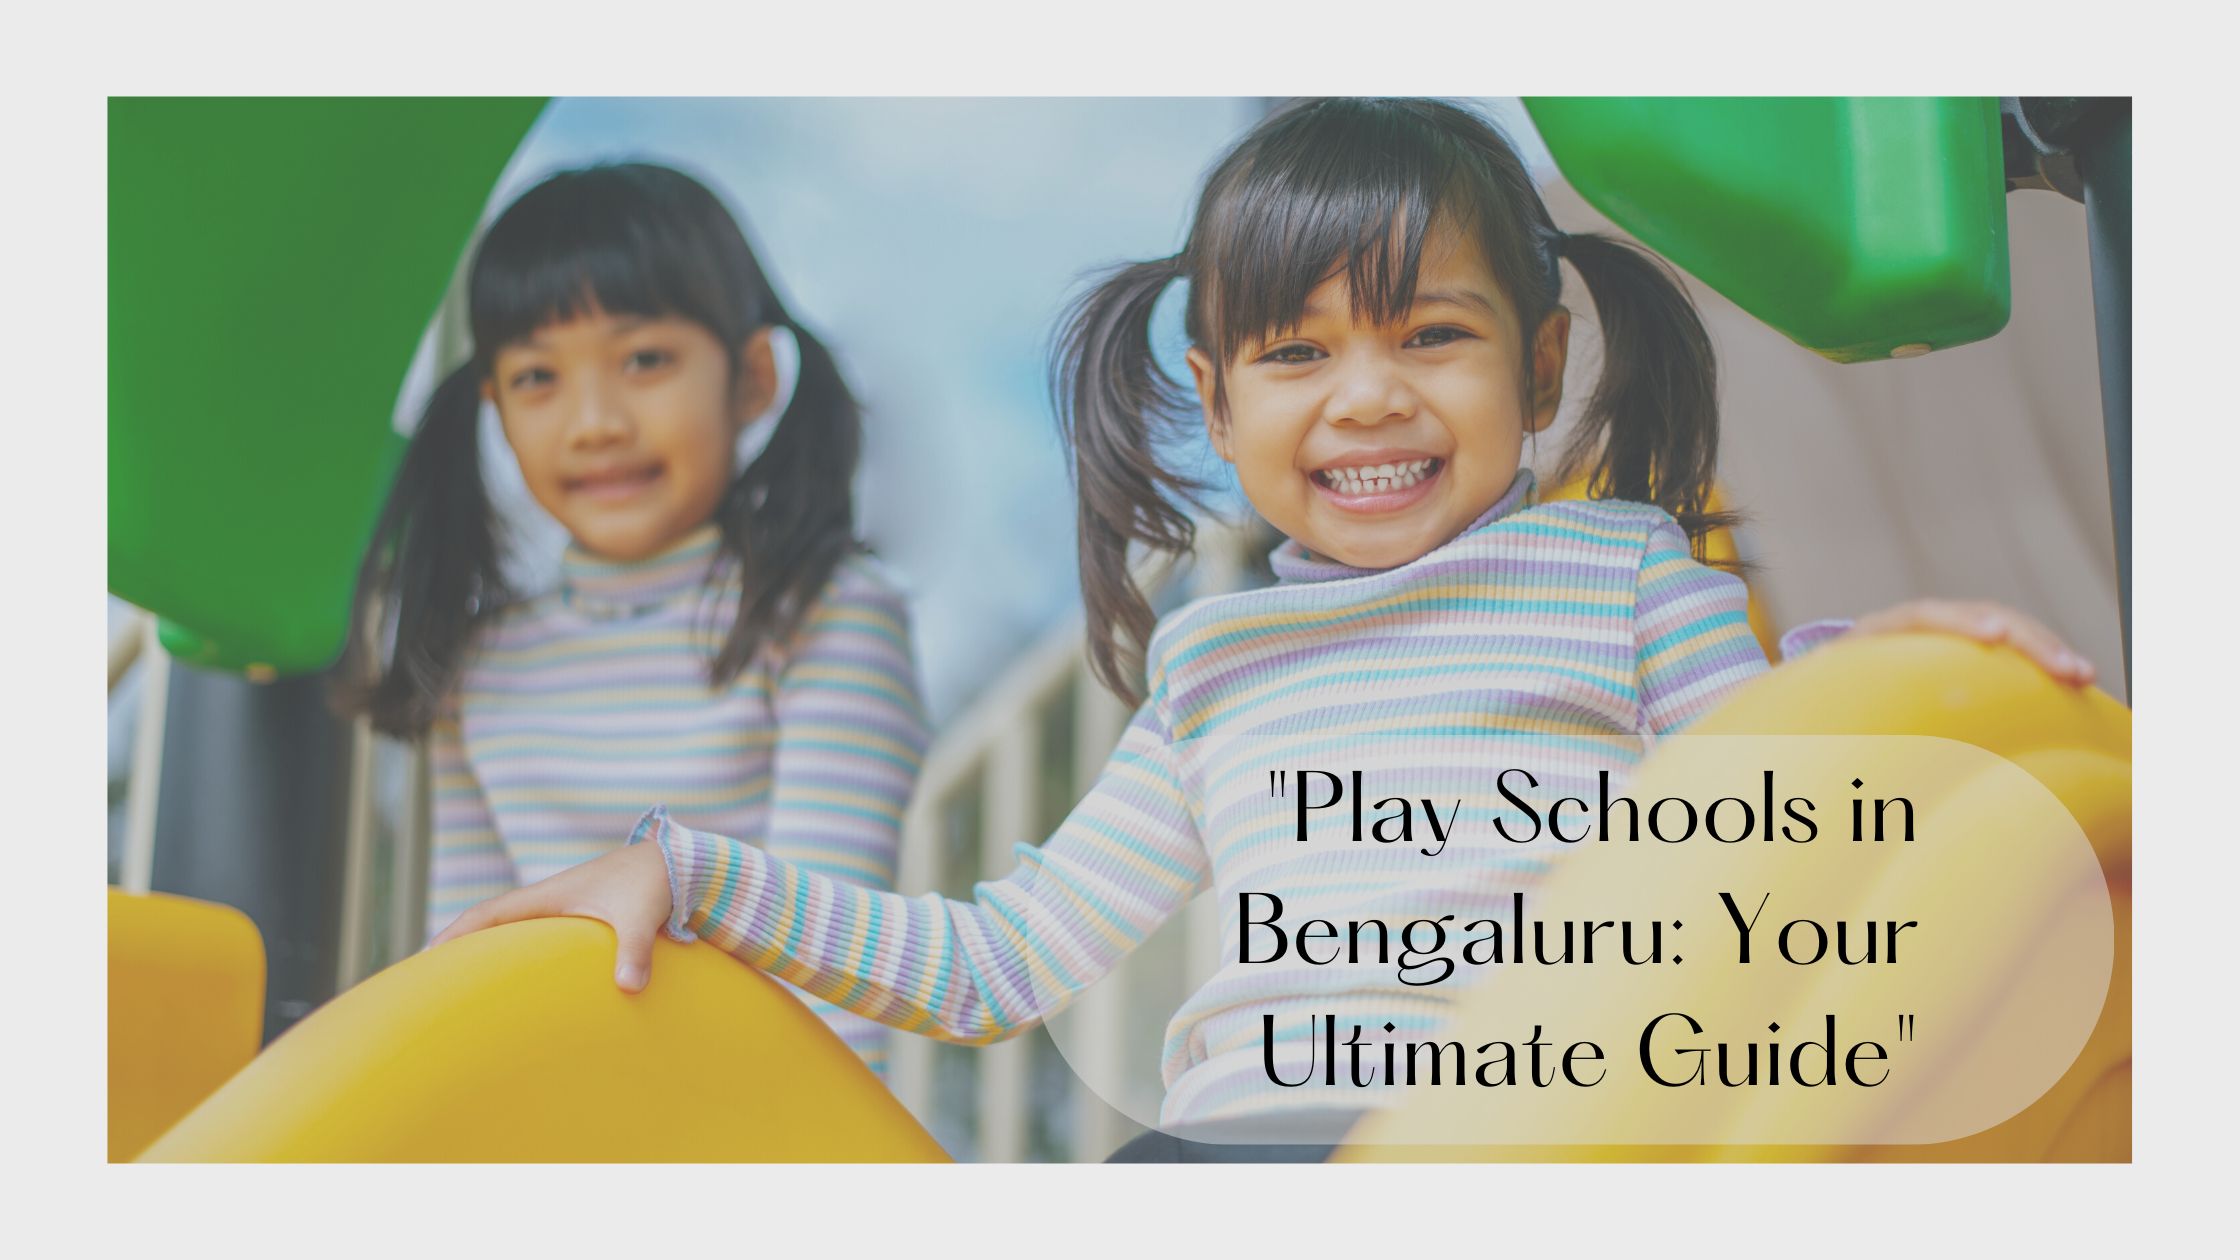 Play Schools in Bengaluru: Your Ultimate Guide